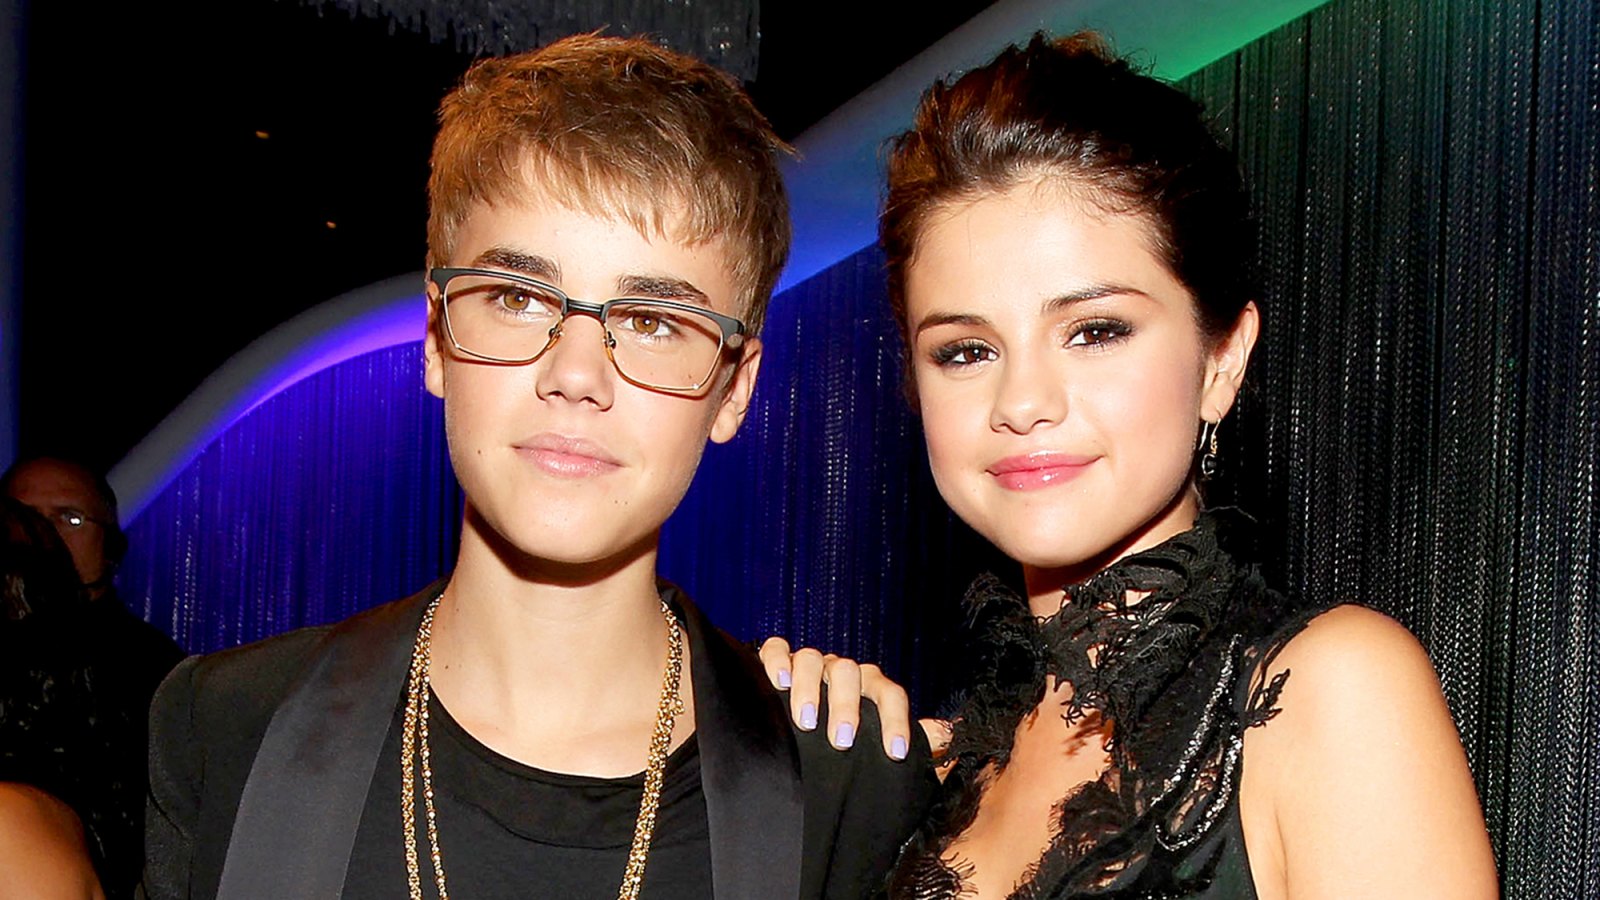 Justin Bieber and Selena Gomez arrive at the 2011 MTV Video Music Awards at Nokia Theatre L.A. LIVE in Los Angeles, California.